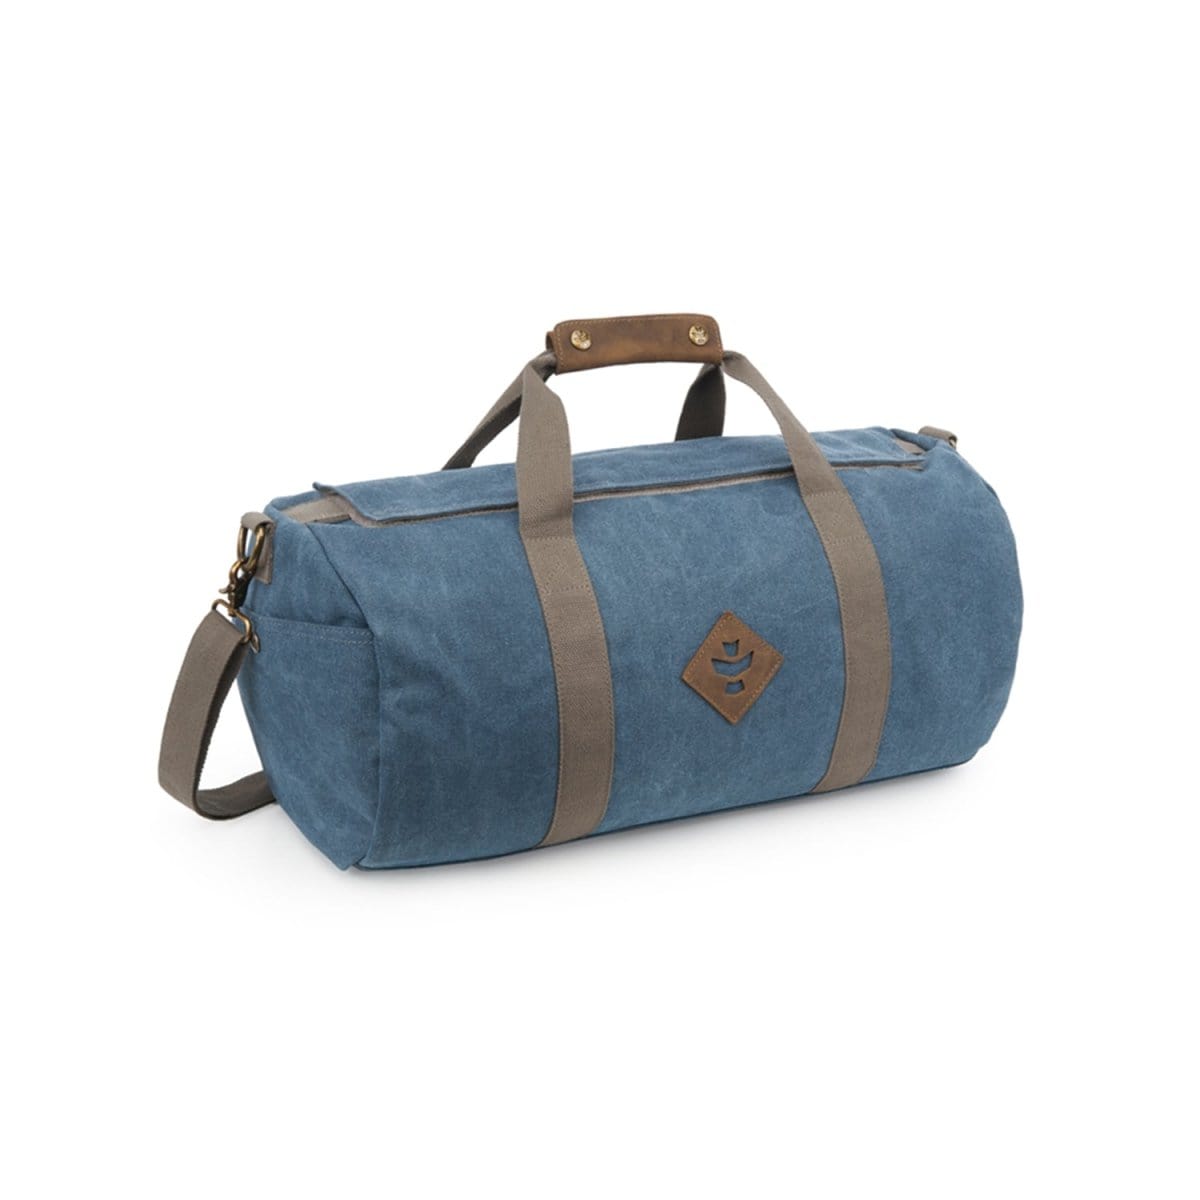 Revelry Supply Travel Bag Marine The Overnighter - Smell Proof Small Duffle